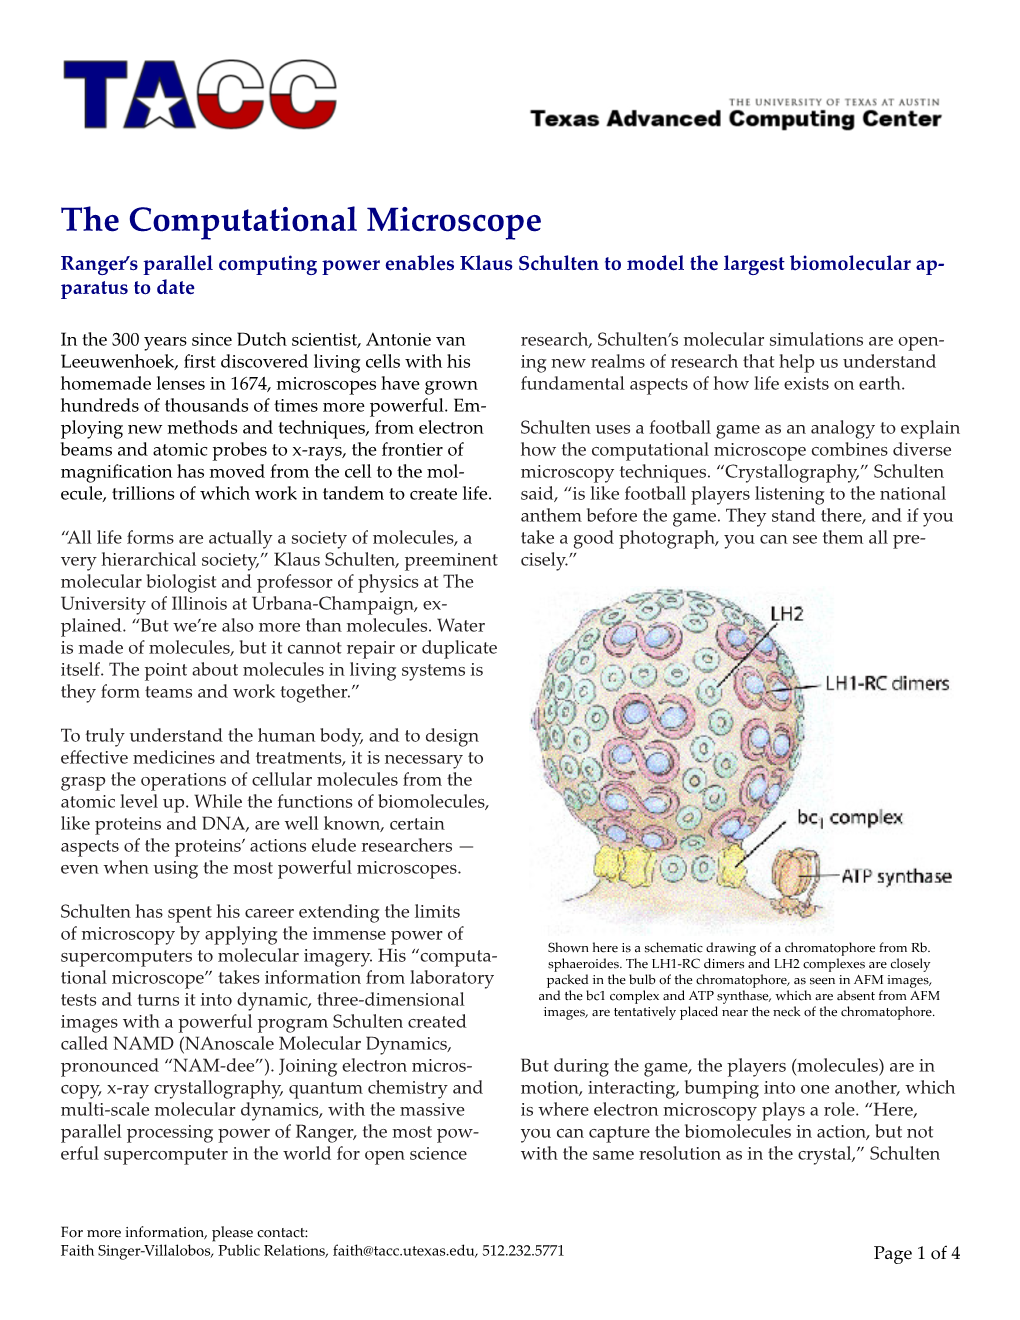 The Computational Microscope Ranger’S Parallel Computing Power Enables Klaus Schulten to Model the Largest Biomolecular Ap- Paratus to Date